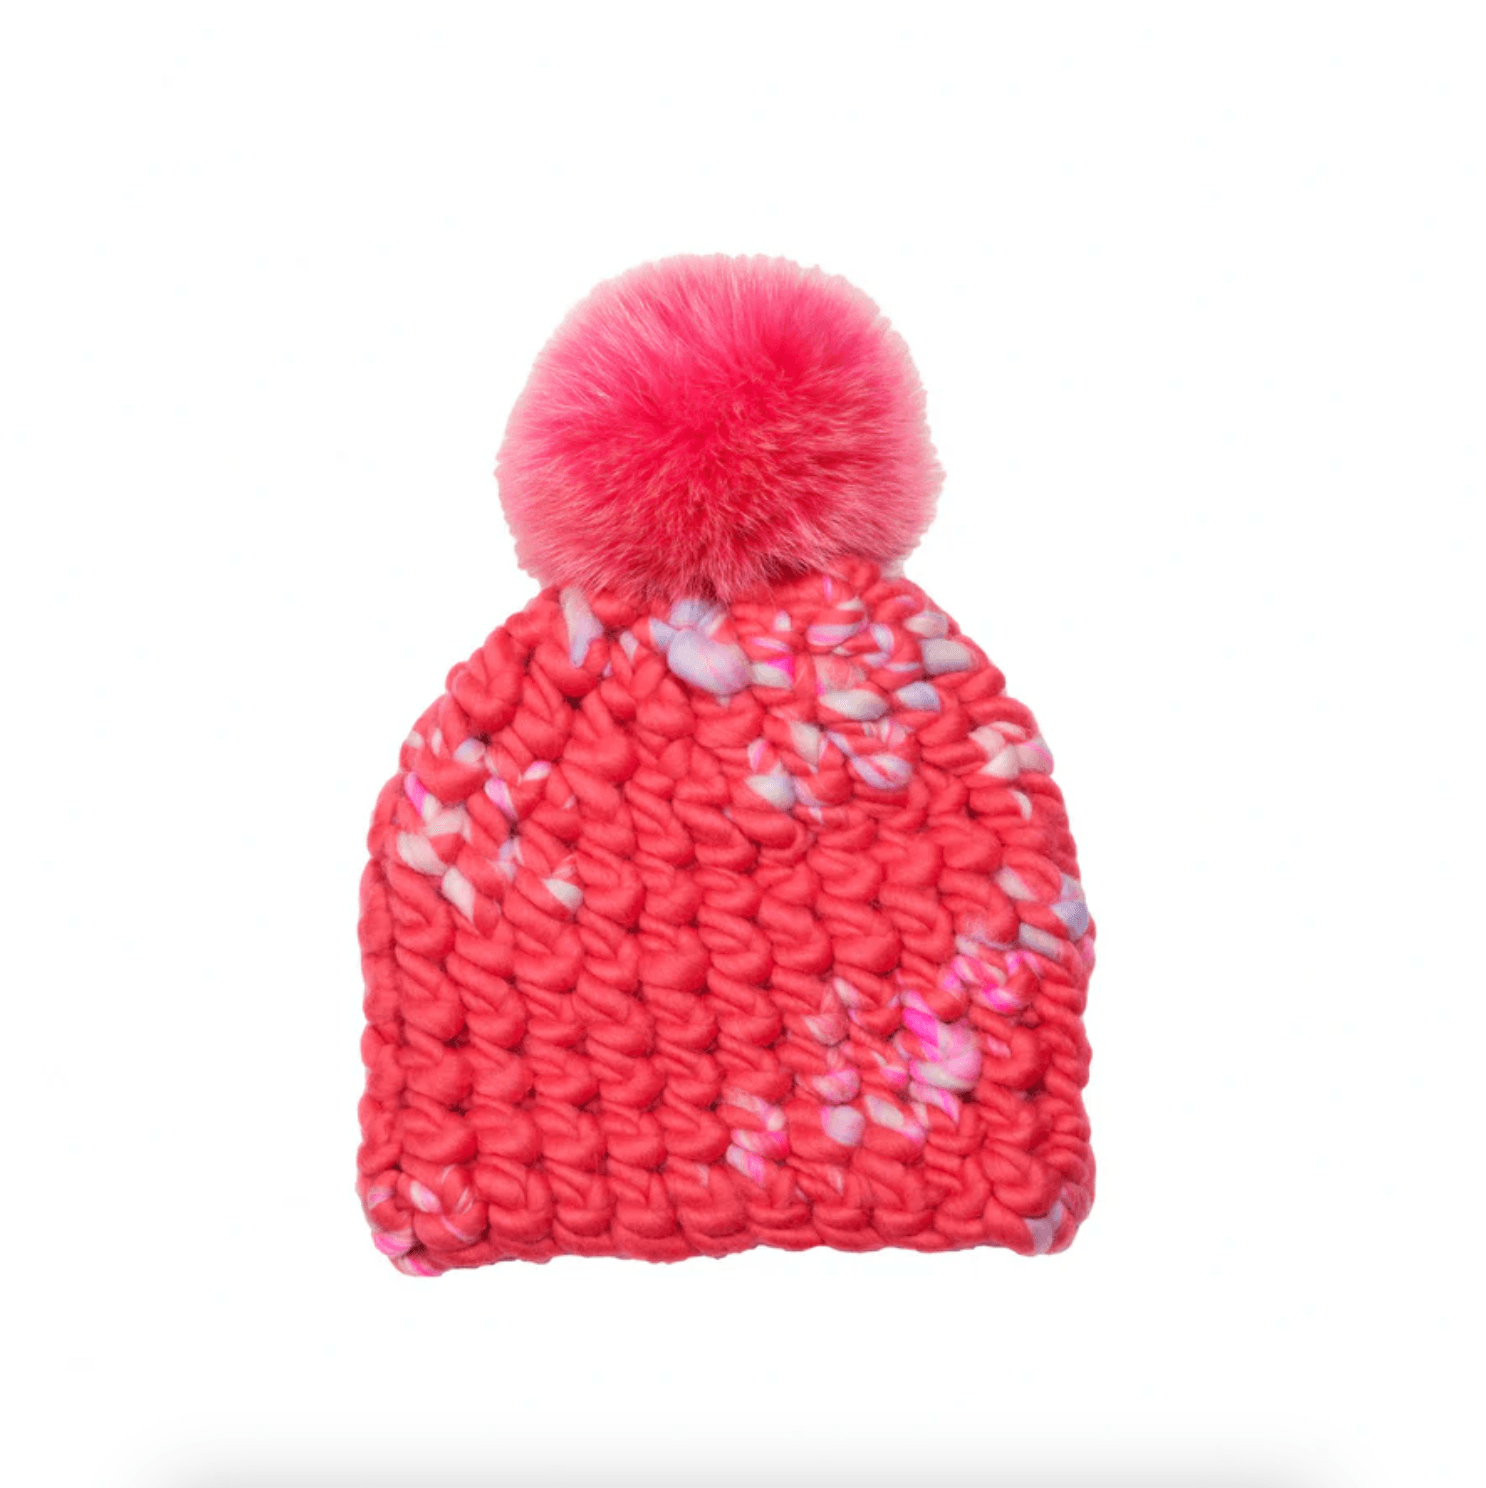 Pomster Beanie in Barbie x Coral by Mischa Lampert - Haven